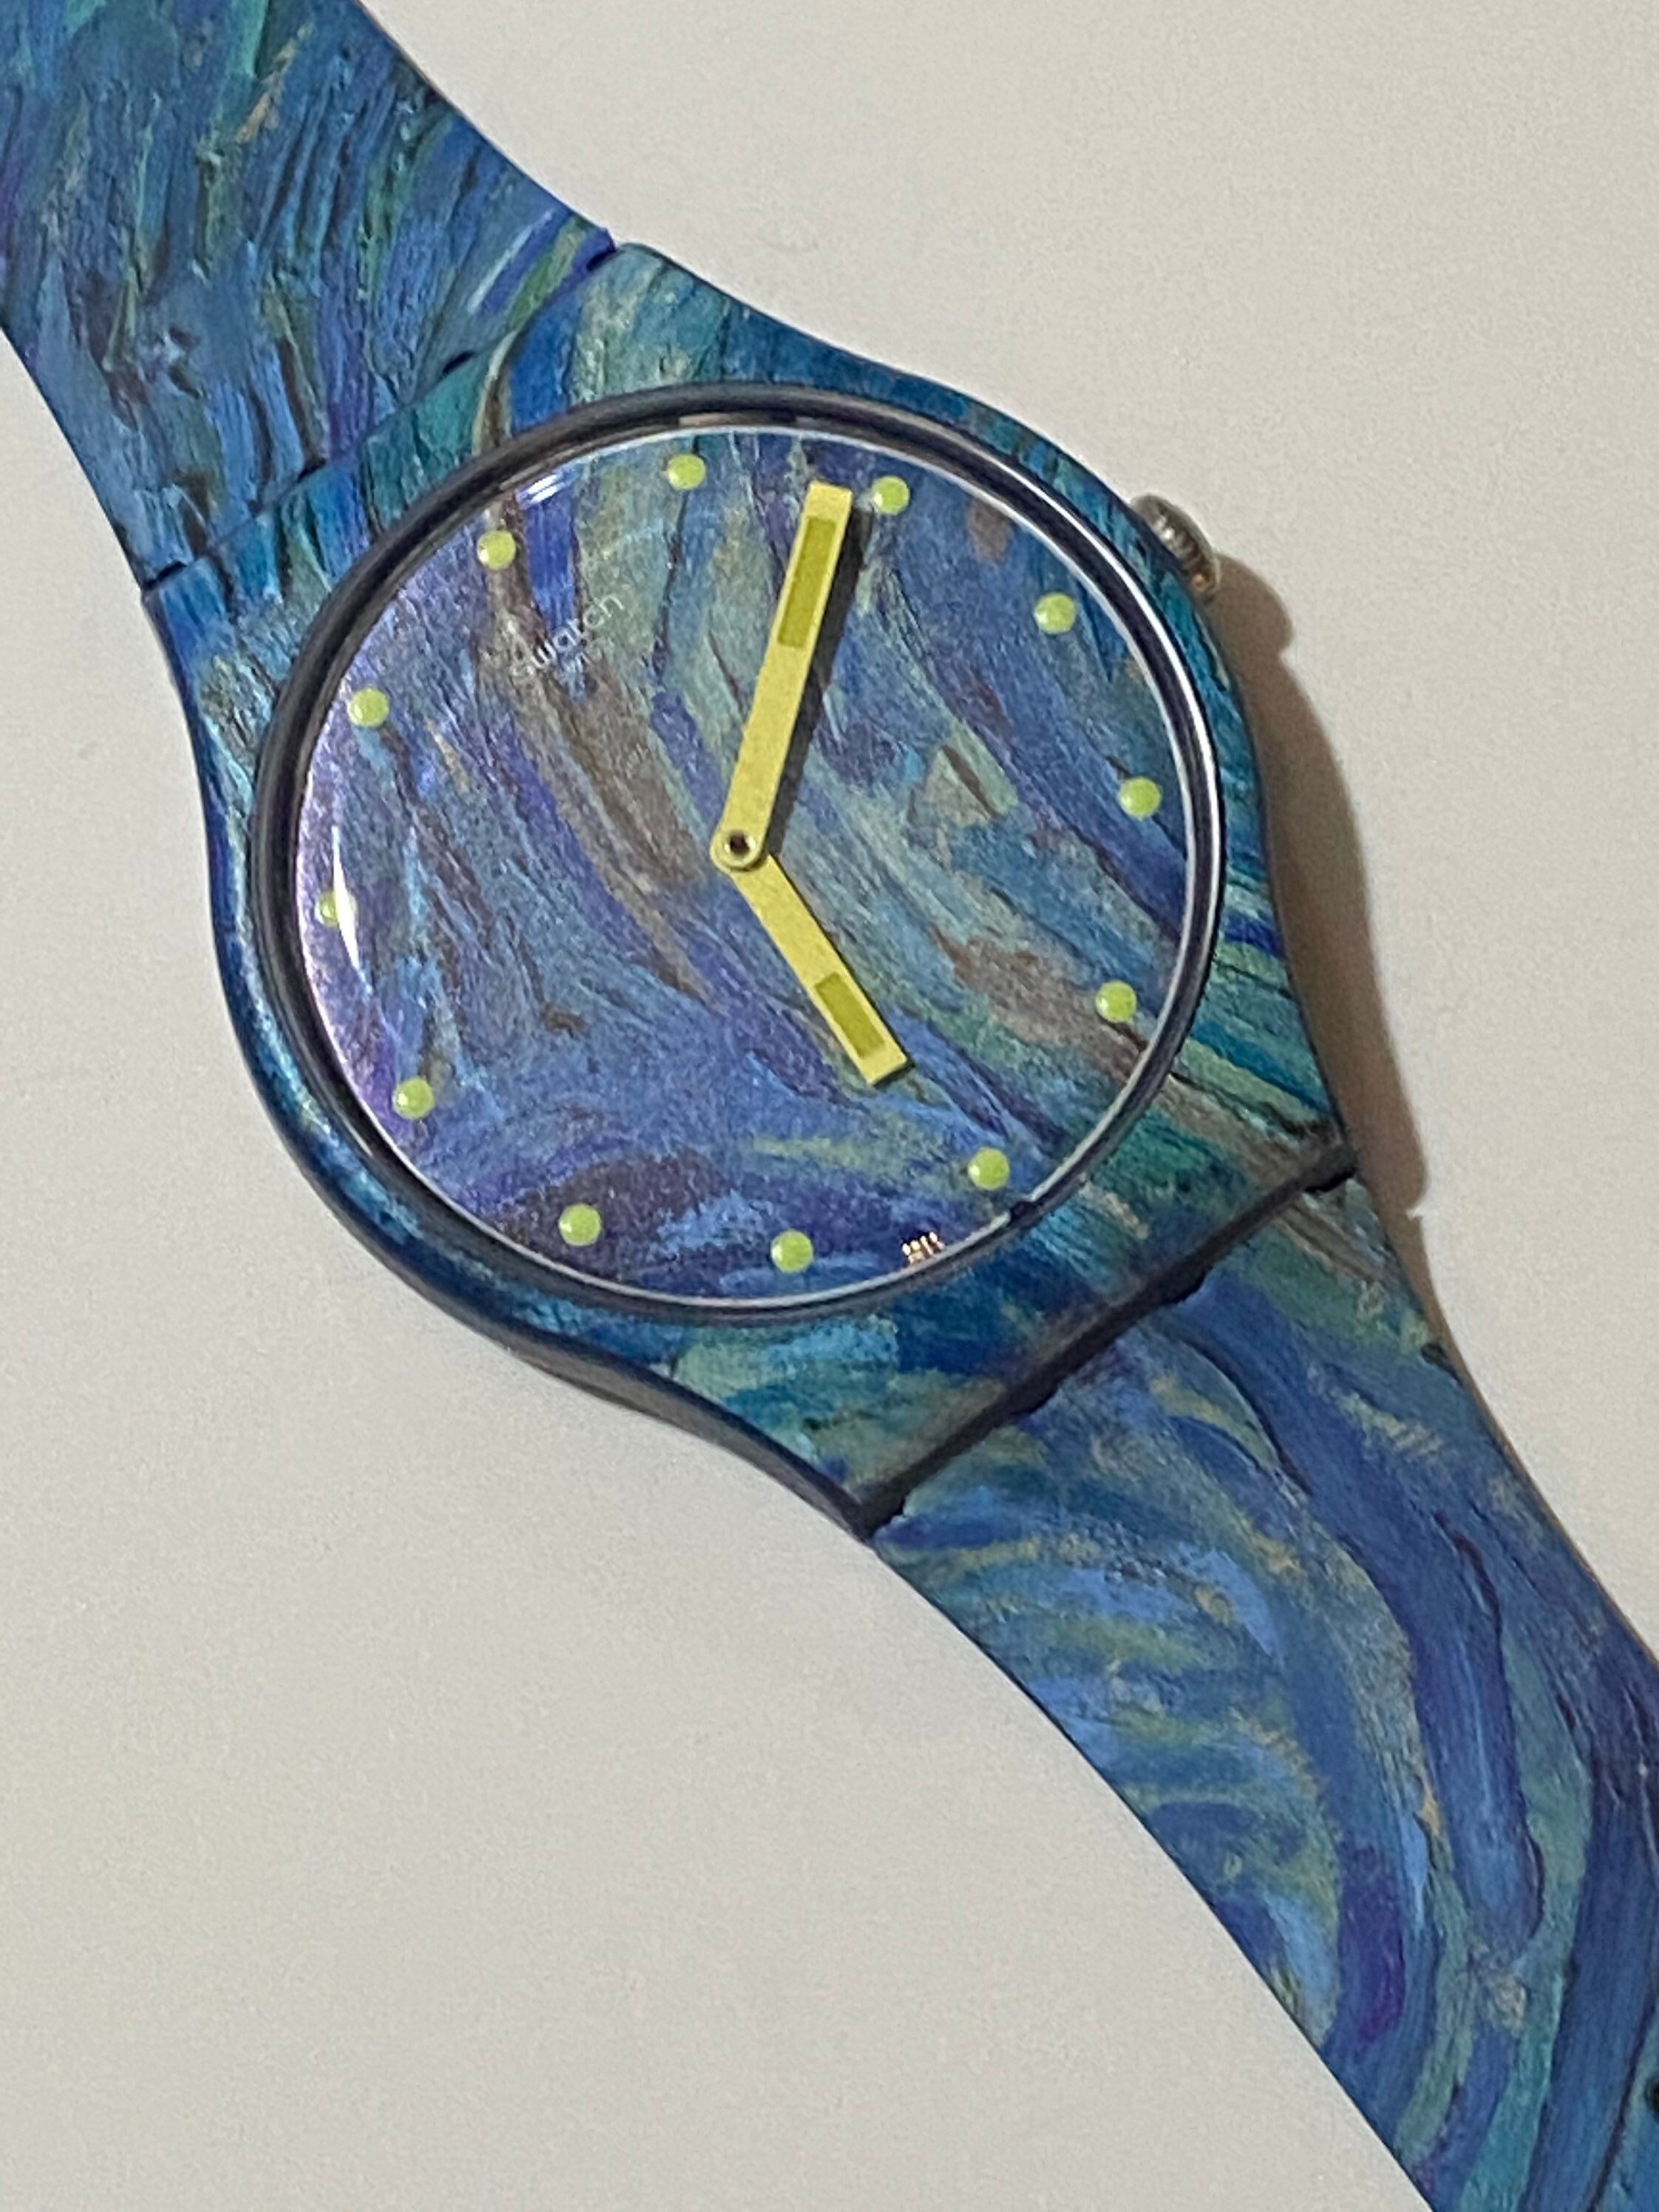 New Swatch Watch Moma Van Gogh Starry Night SUOZ335 Special Sold